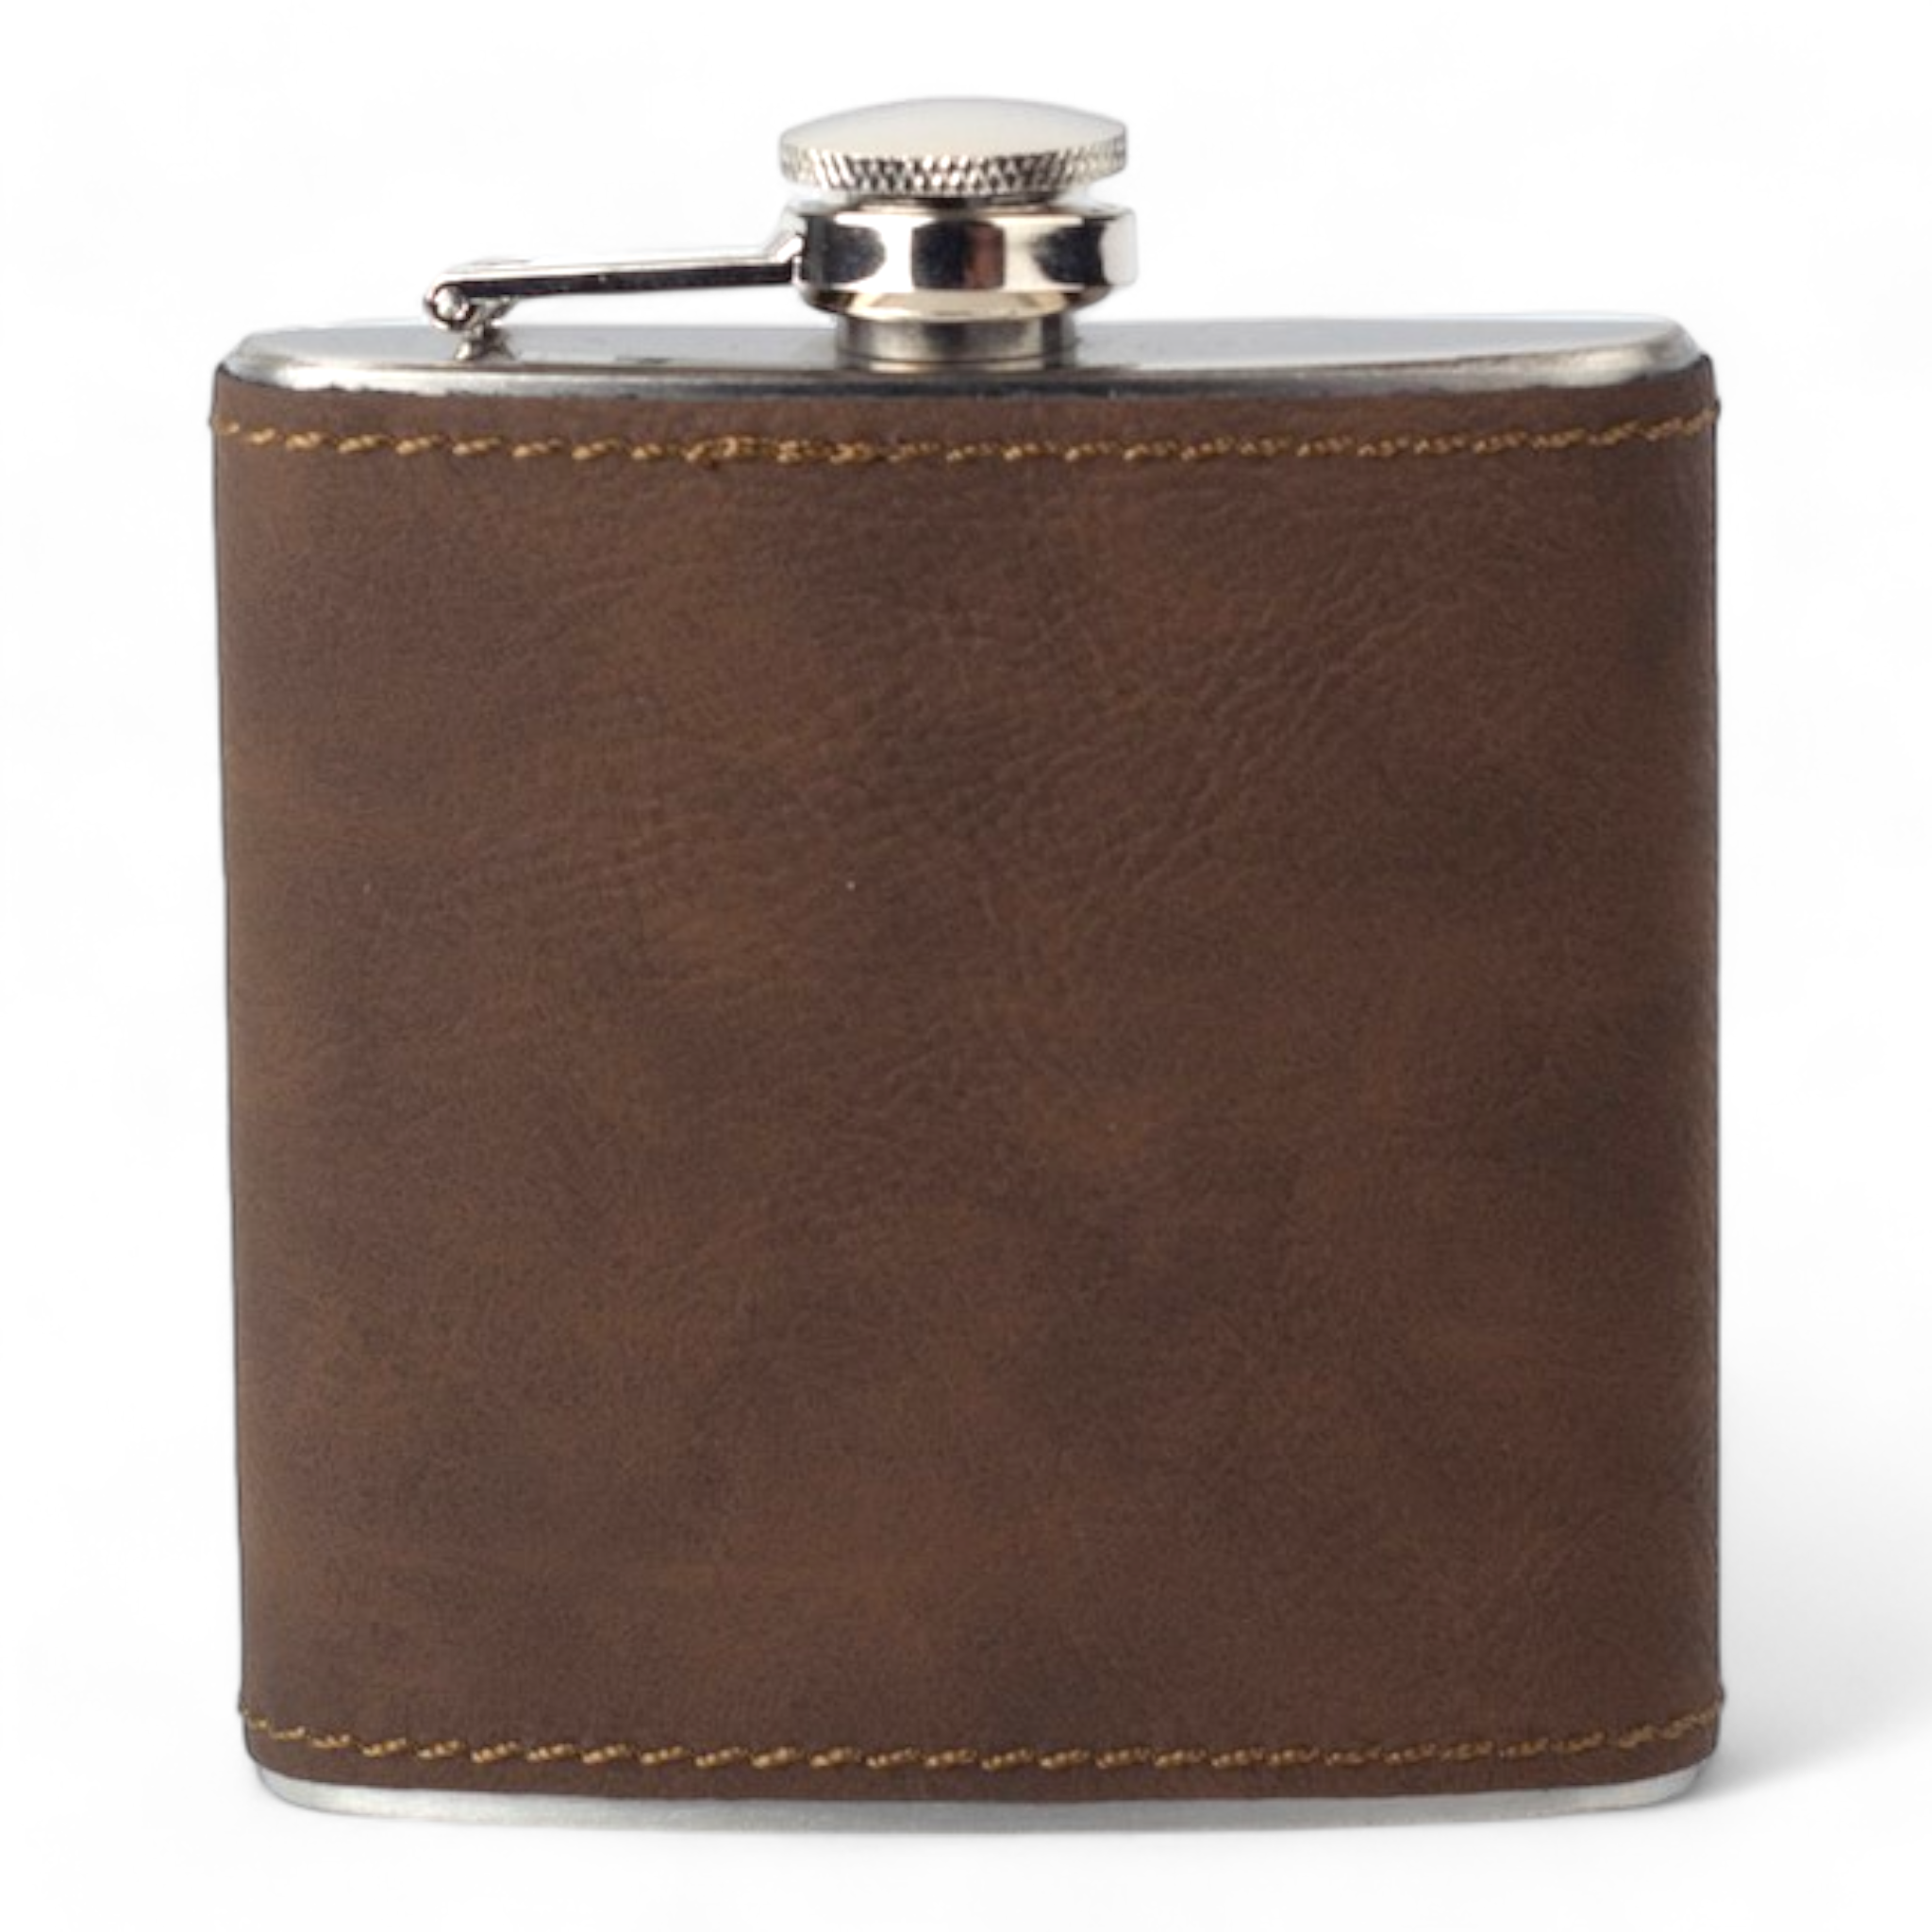 * Leather Hip Flask